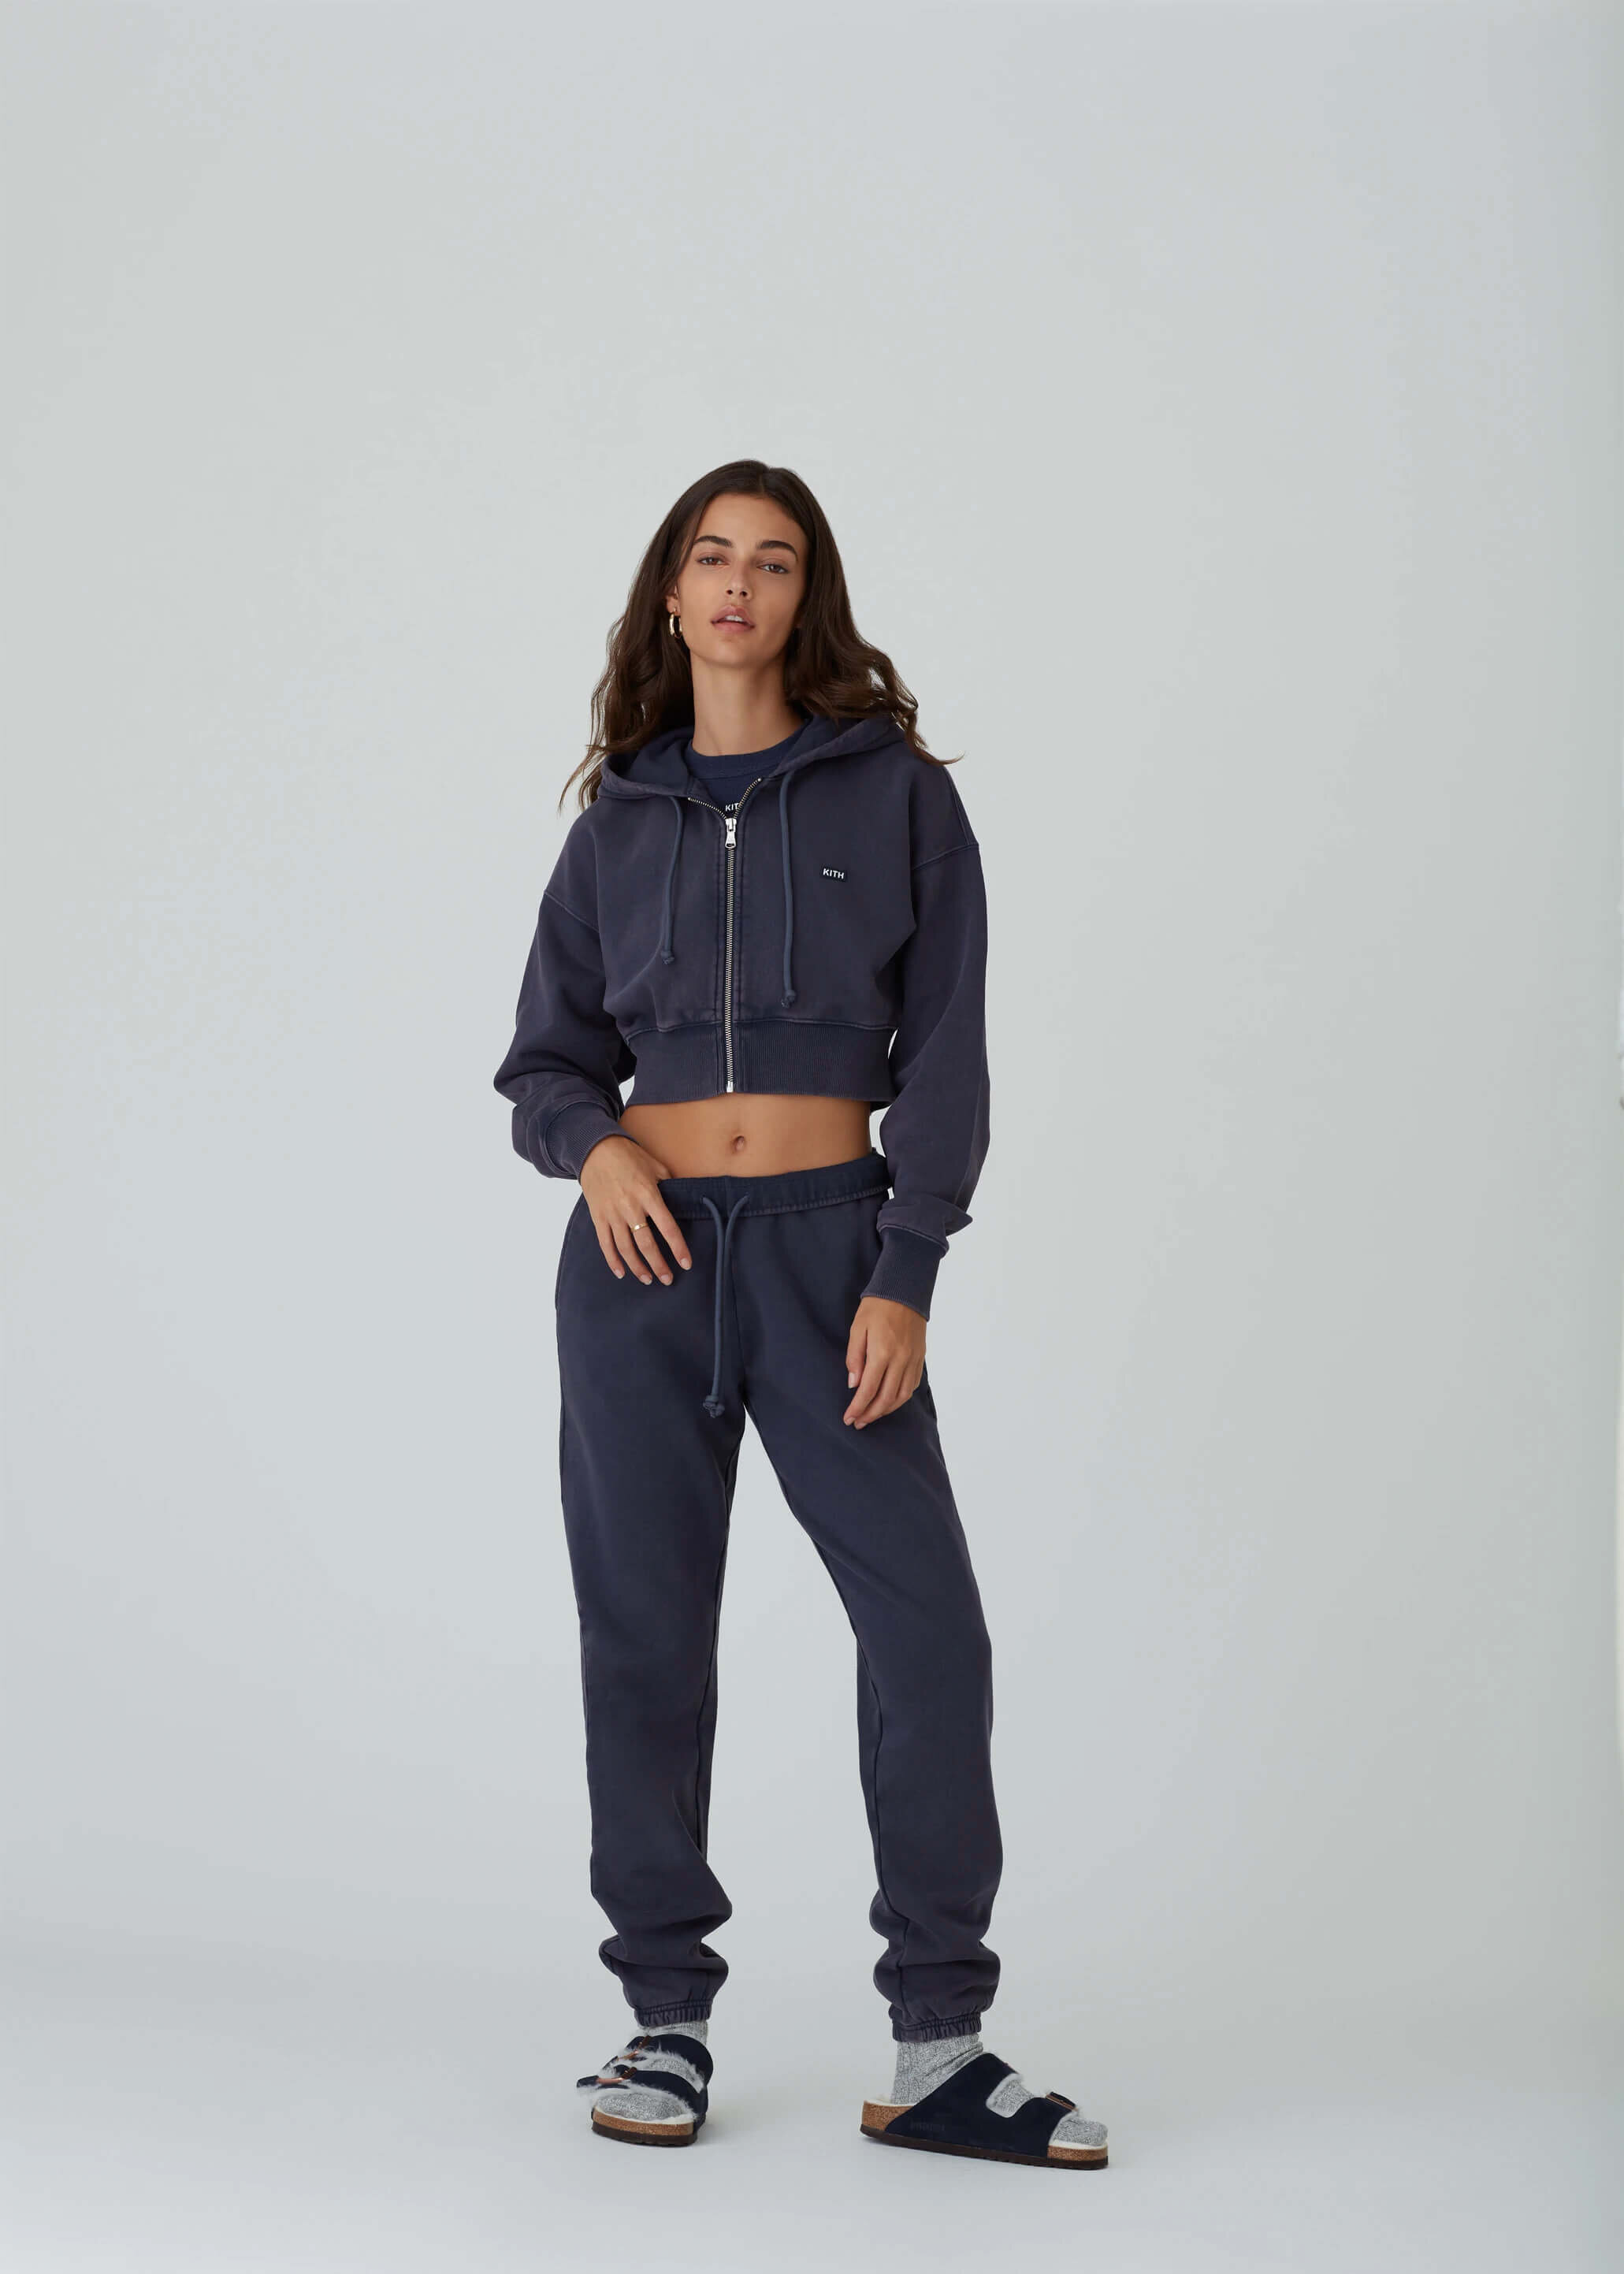 CNK-Kith-Spring-1-2021-Collection-Look-10.jpeg